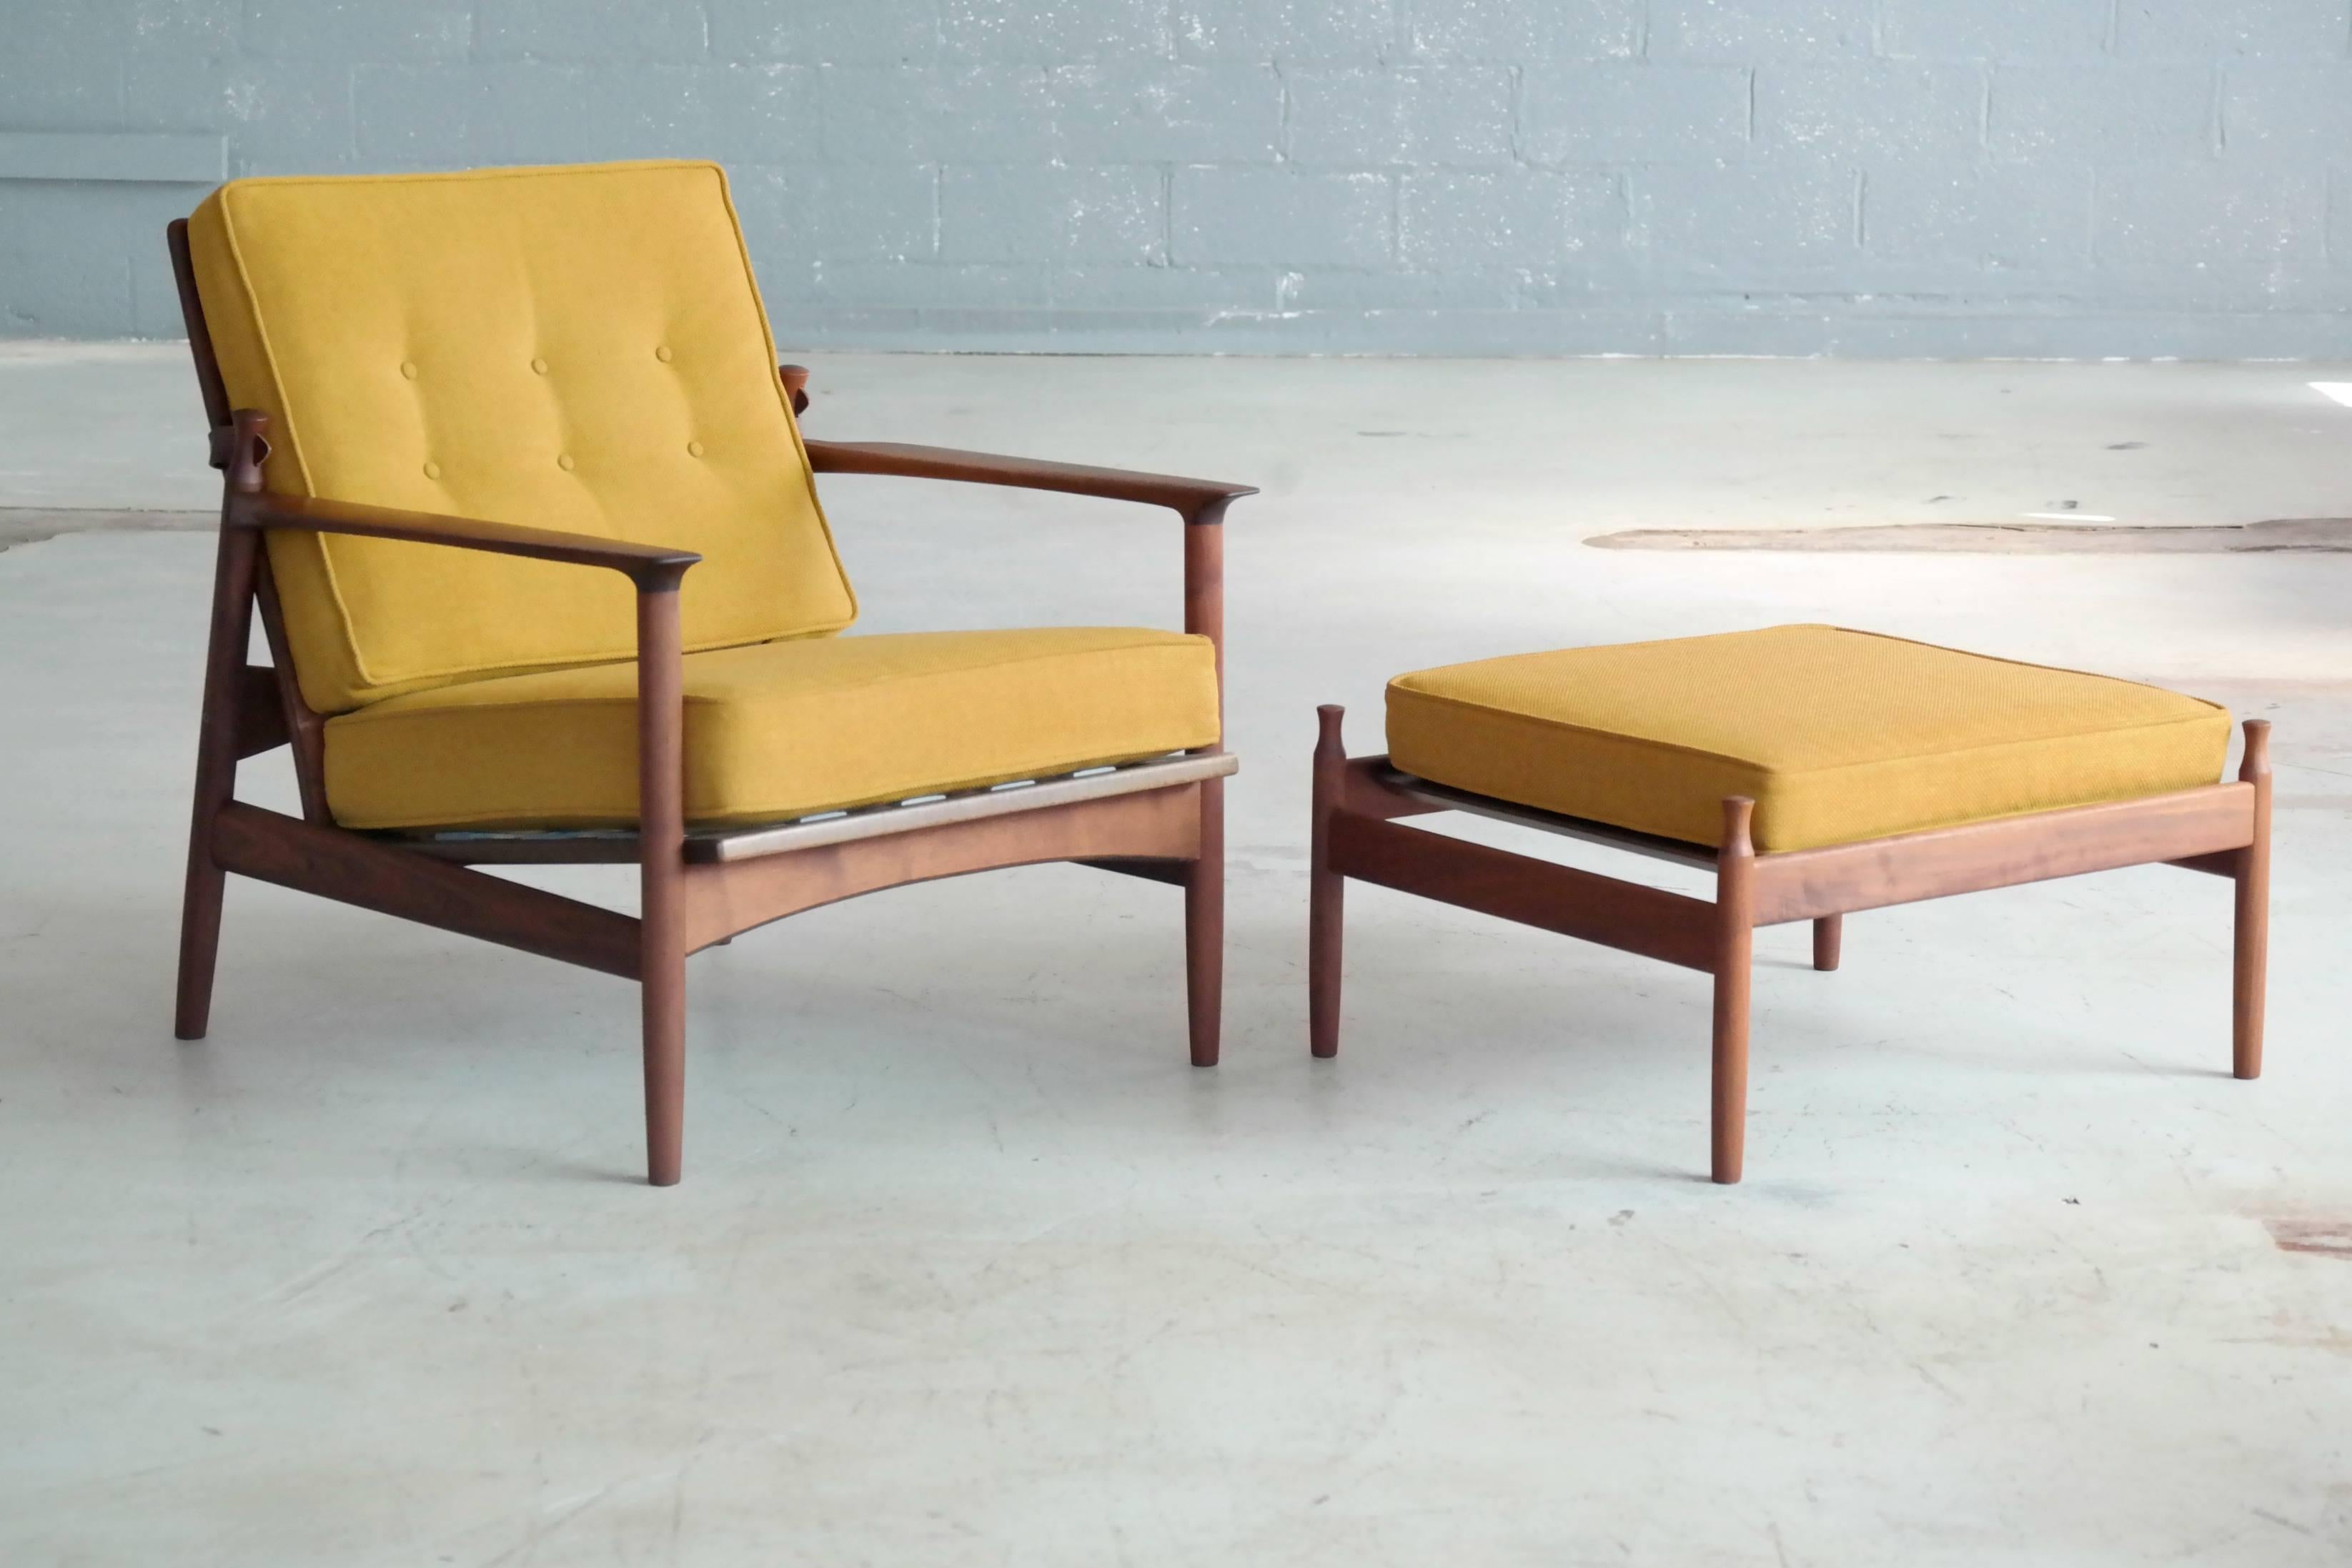 Rare 1950s easy chair originally designed by famed Danish Designer, Ib Kofod-Larsen for US retailer, Selig. The chair features a very distinct design based on a beautiful walnut frame with oblong cut-outs in the backrest through which the mustard